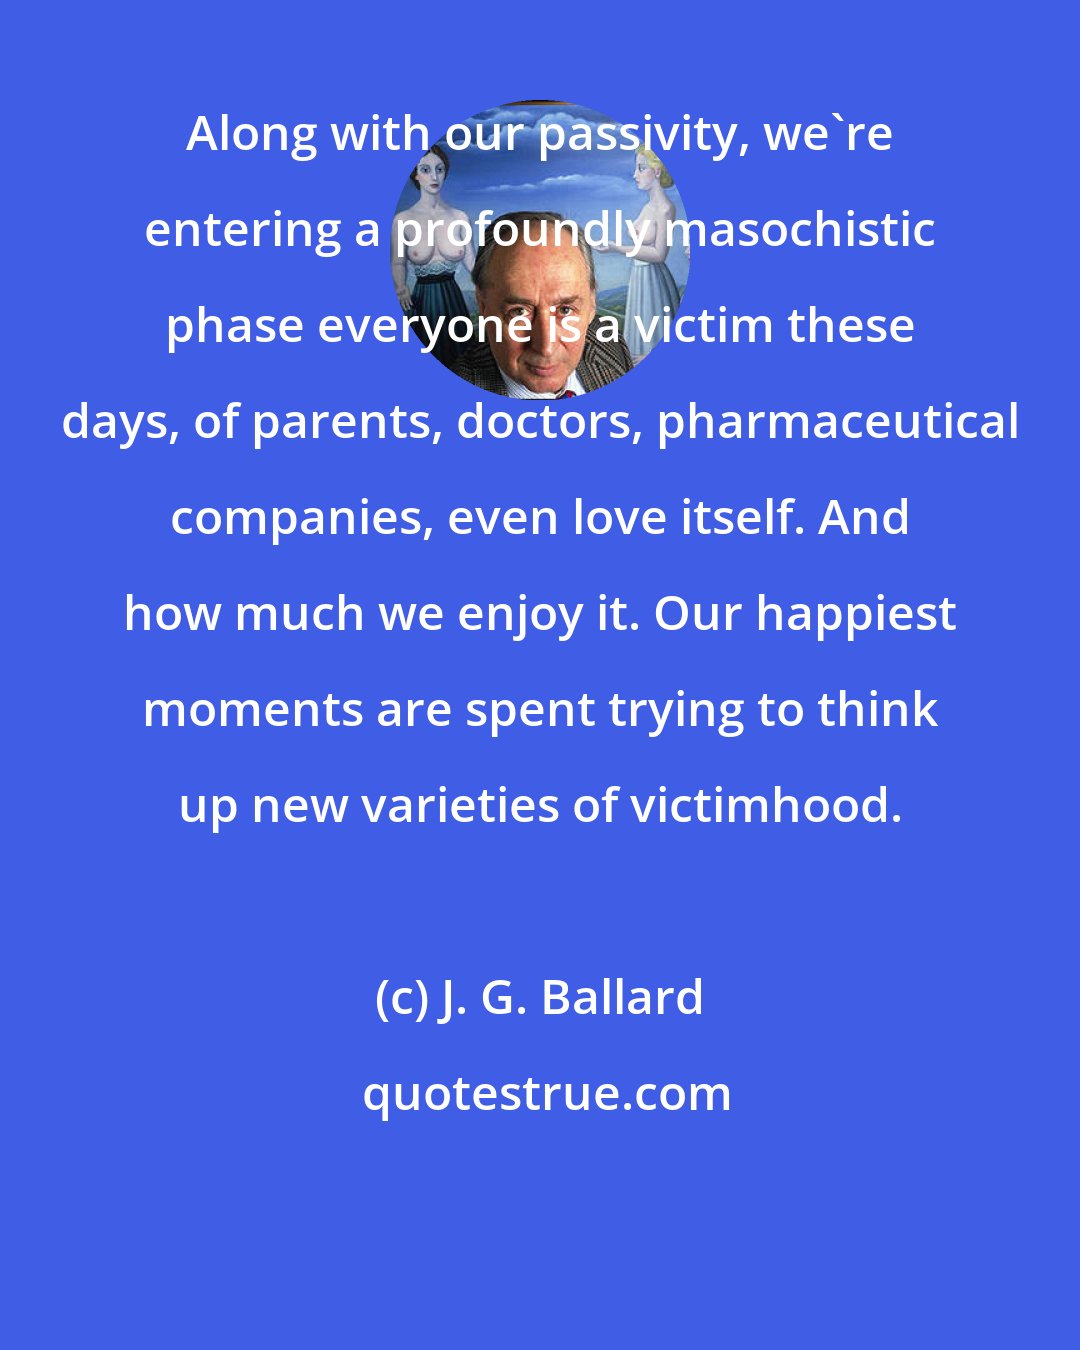 J. G. Ballard: Along with our passivity, we're entering a profoundly masochistic phase everyone is a victim these days, of parents, doctors, pharmaceutical companies, even love itself. And how much we enjoy it. Our happiest moments are spent trying to think up new varieties of victimhood.